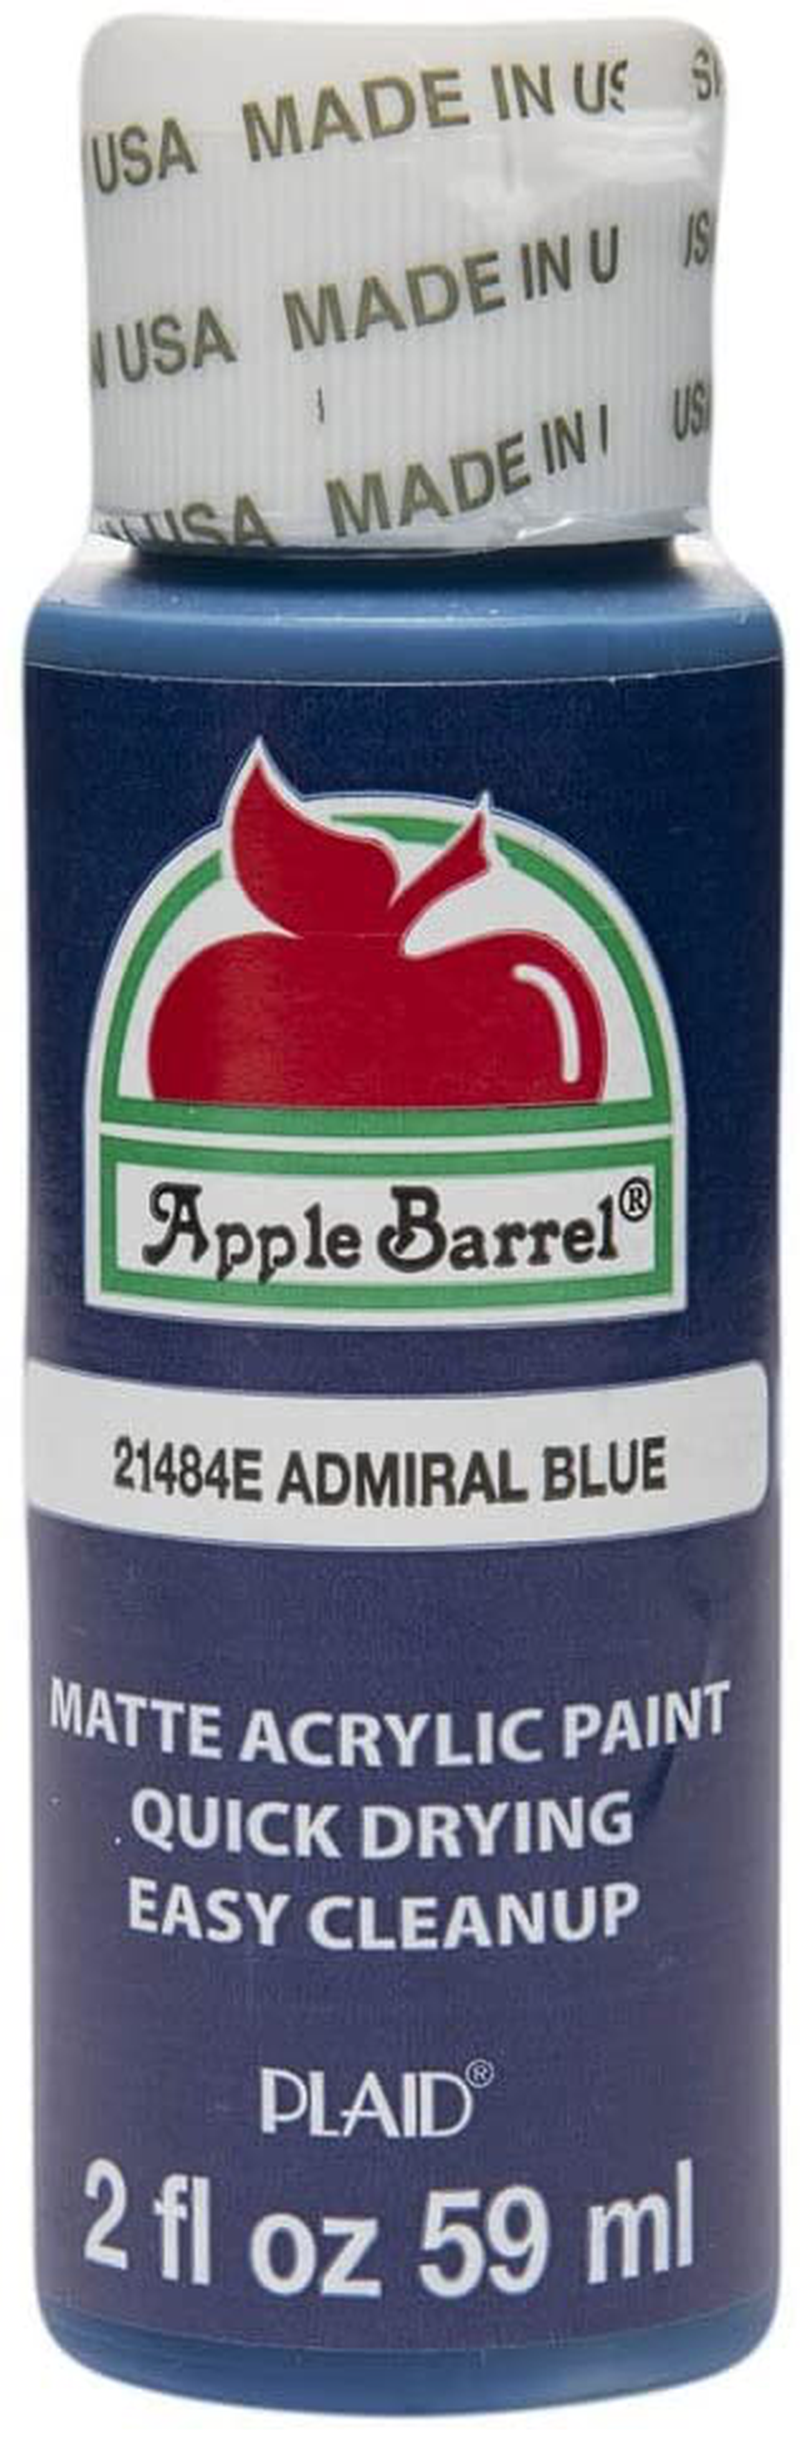 Apple Barrel Acrylic Paint in Assorted Colors (2 oz), 21484, Admiral Blue